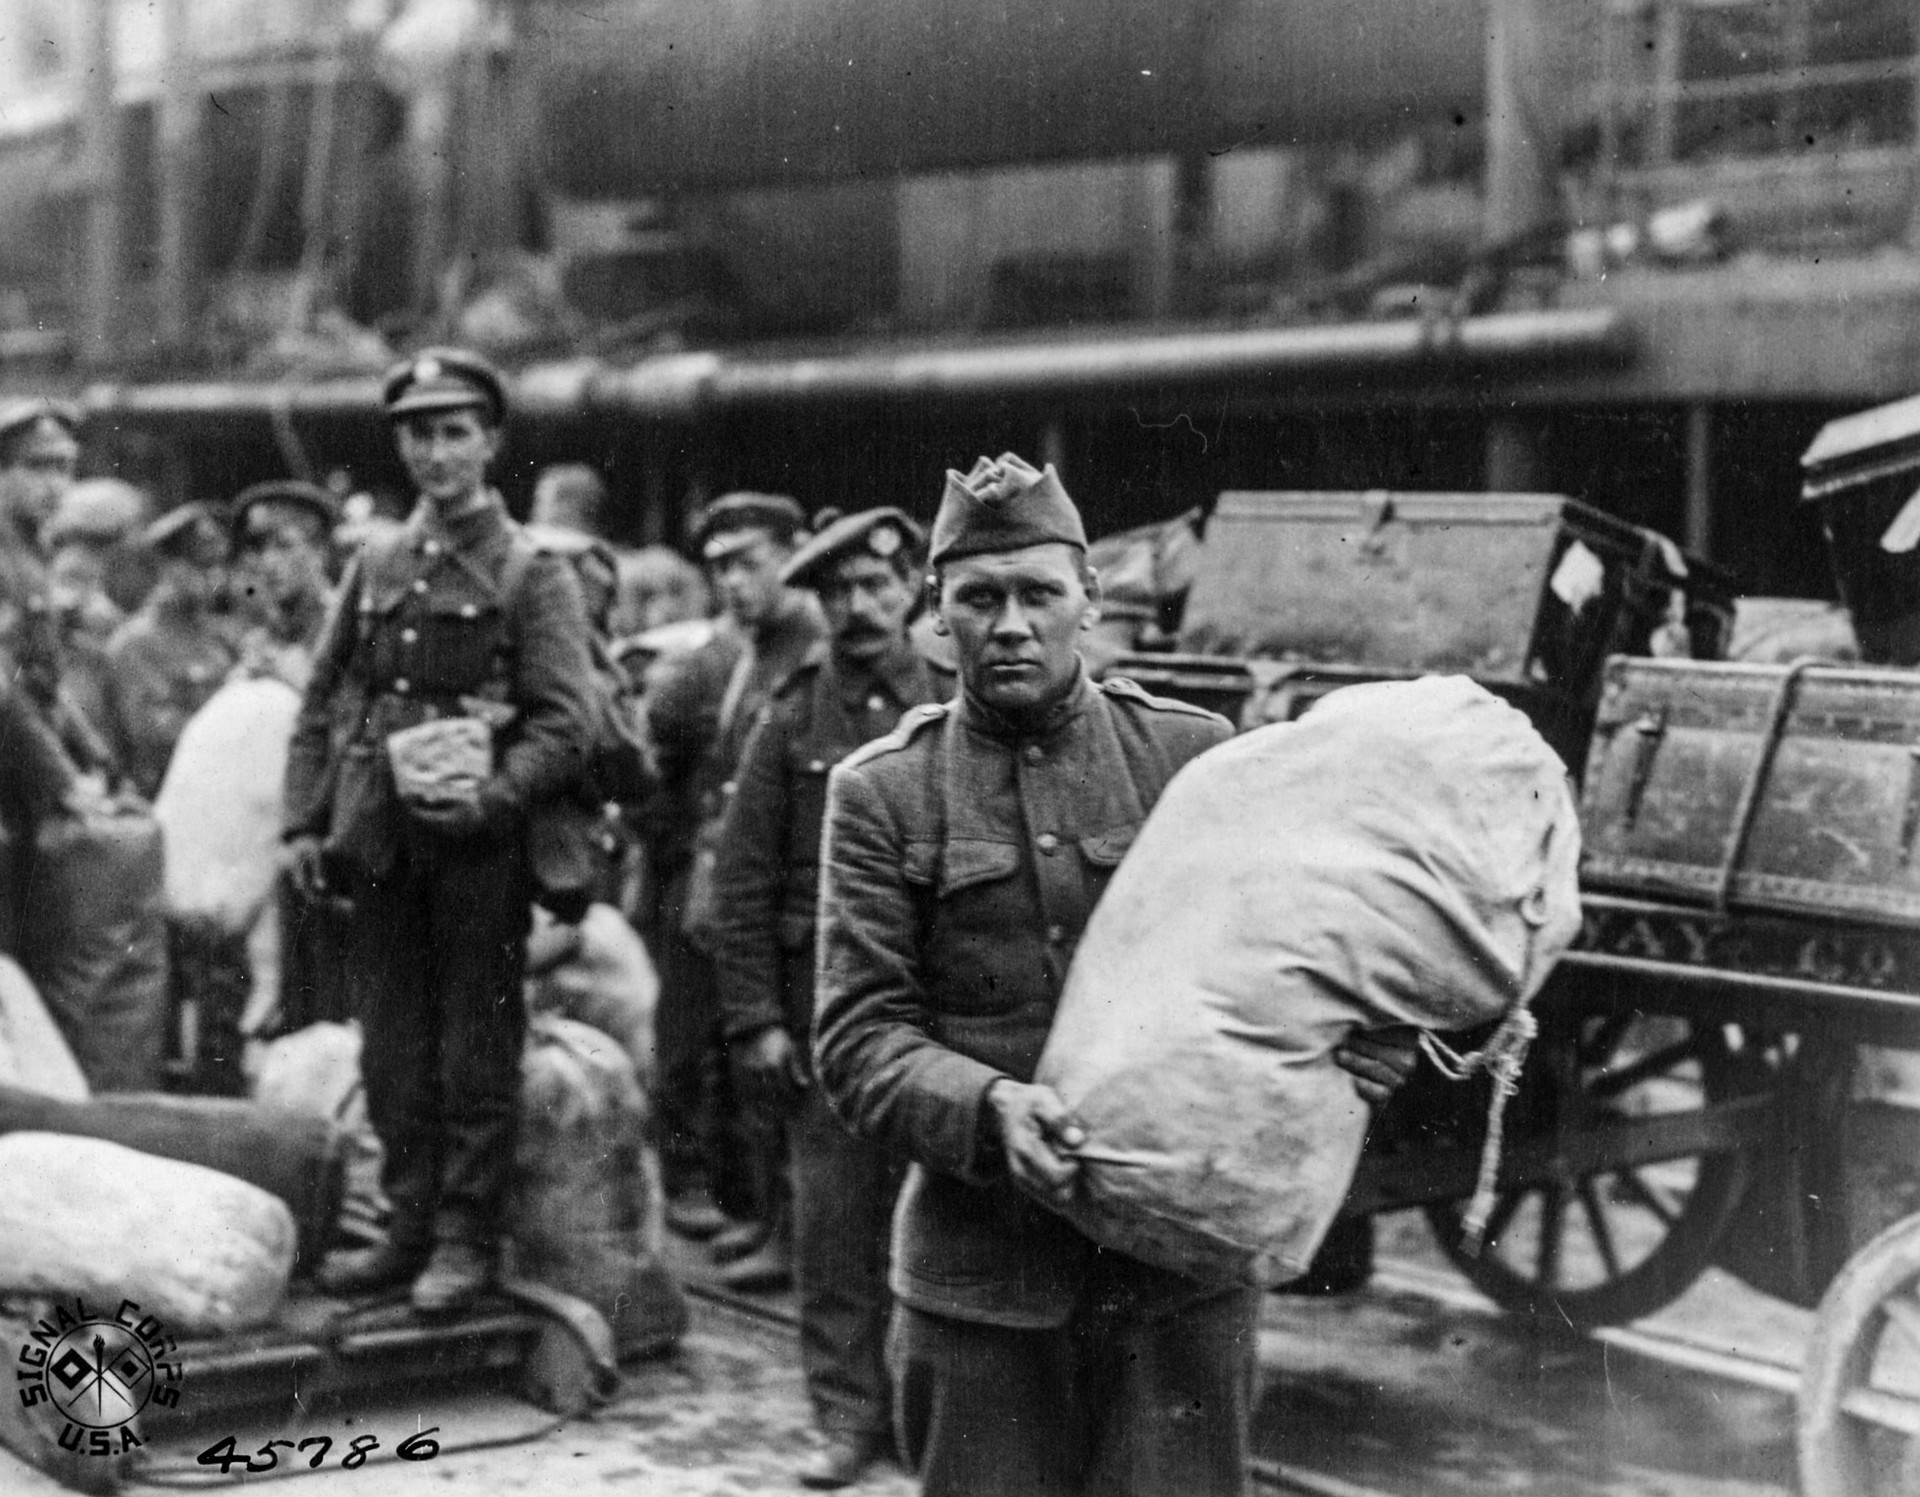  A U.S. soldier pauses for a photograph while loading supplies onto a ship bound for Russia in 1918.